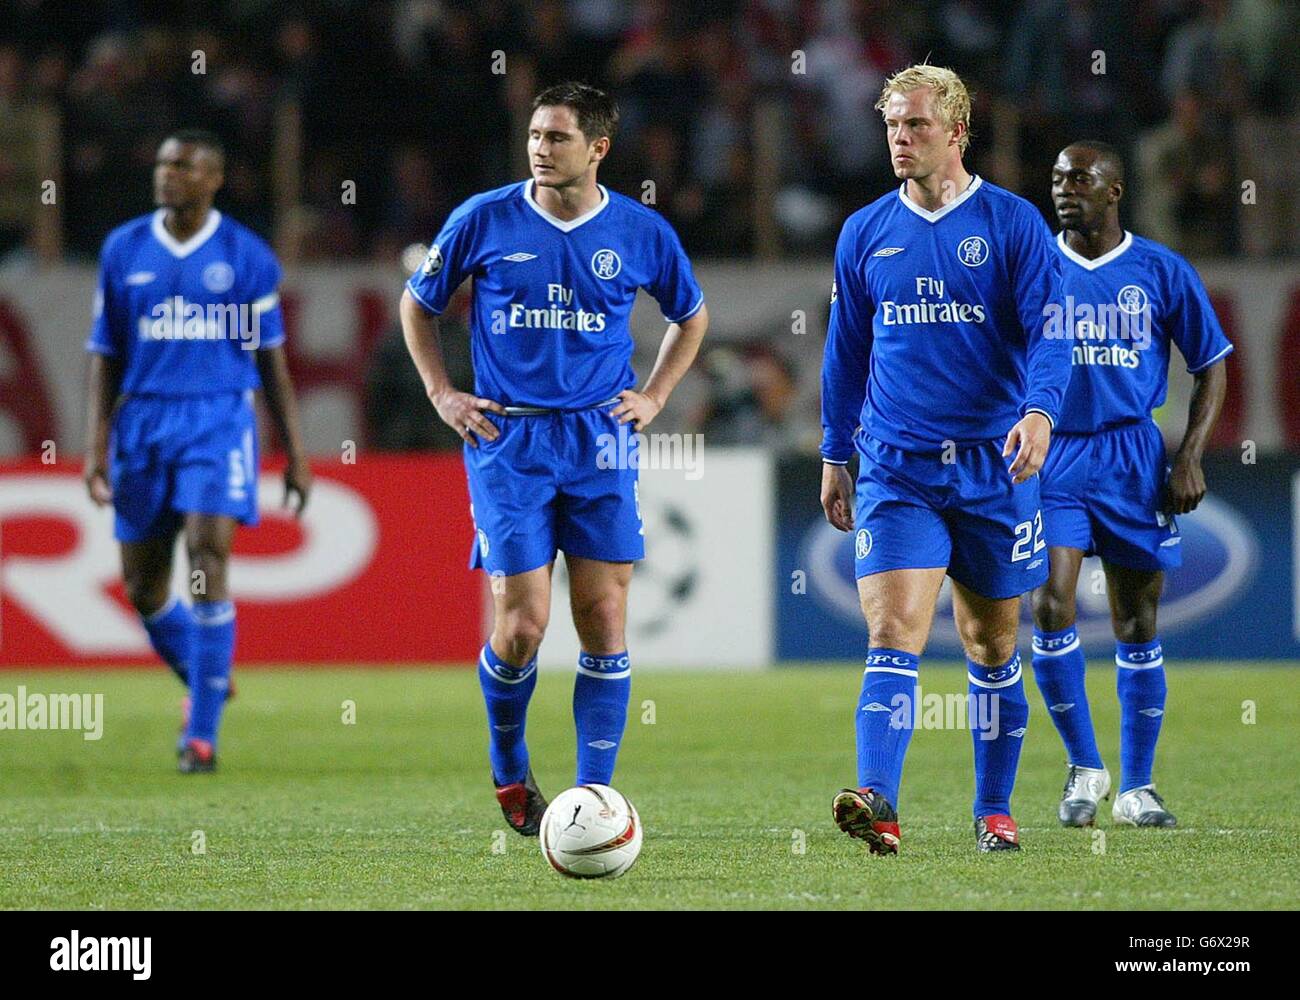 Chelsea players show their dejection after Monaco score during the UEFA Champions League semi final 1st leg match at the Stade Louis II in Monaco. Stock Photo